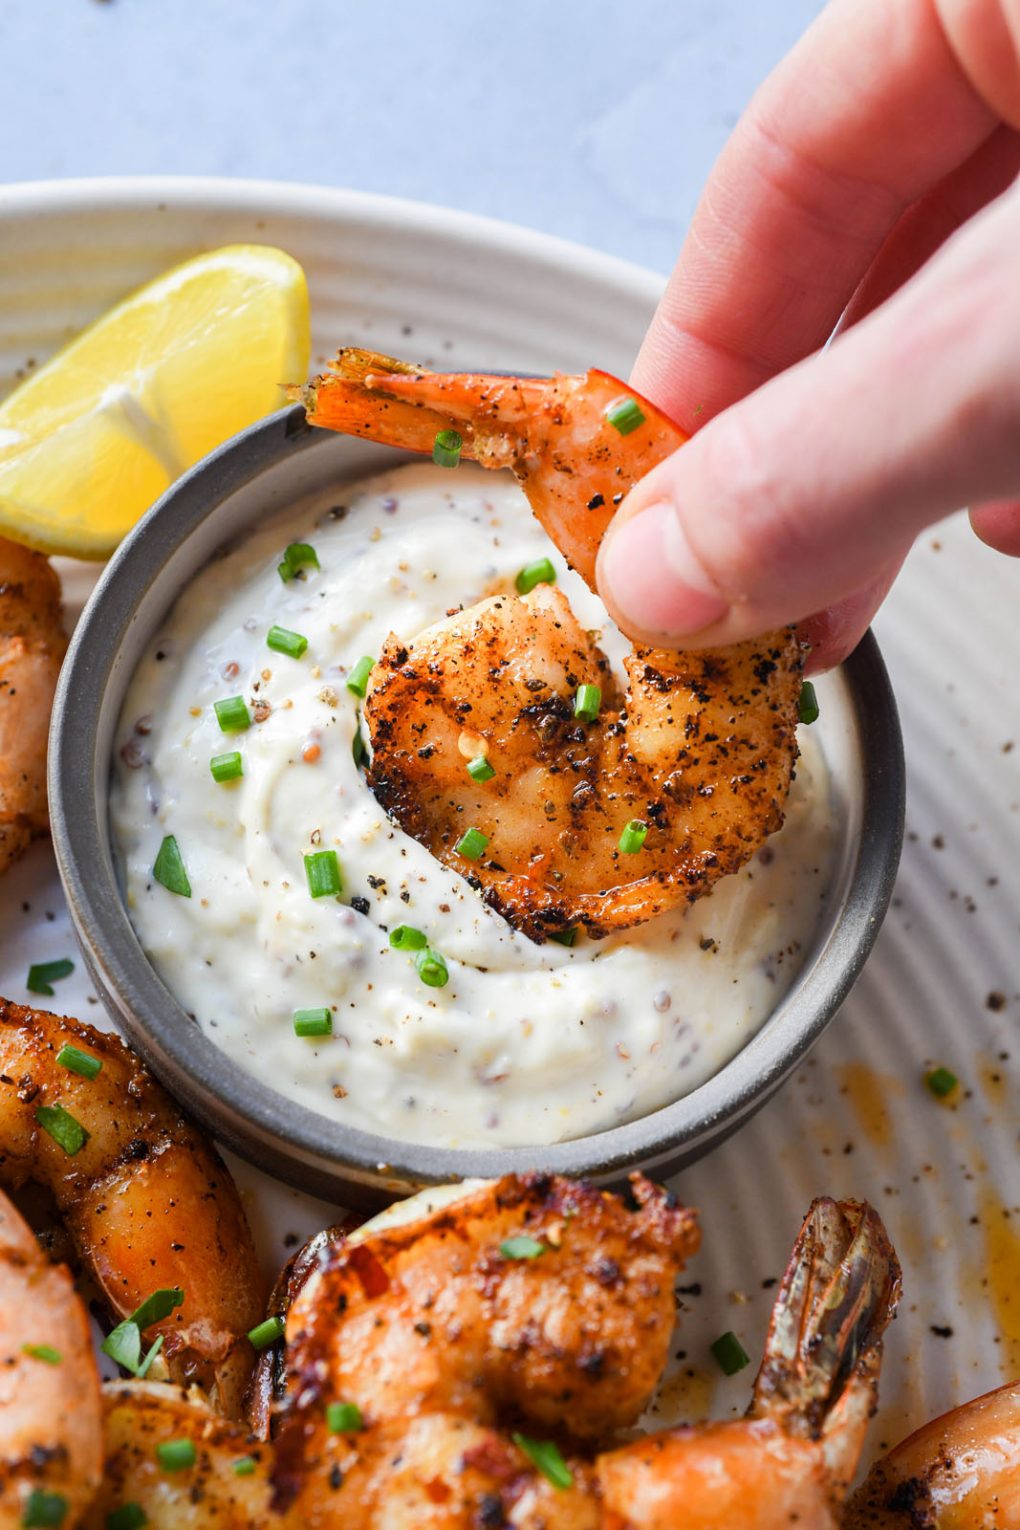 Picture of a hand dipping a cajun spiced shrimp into small bowl of aioli. On a light speckled plate next to a small lemon wedge. 